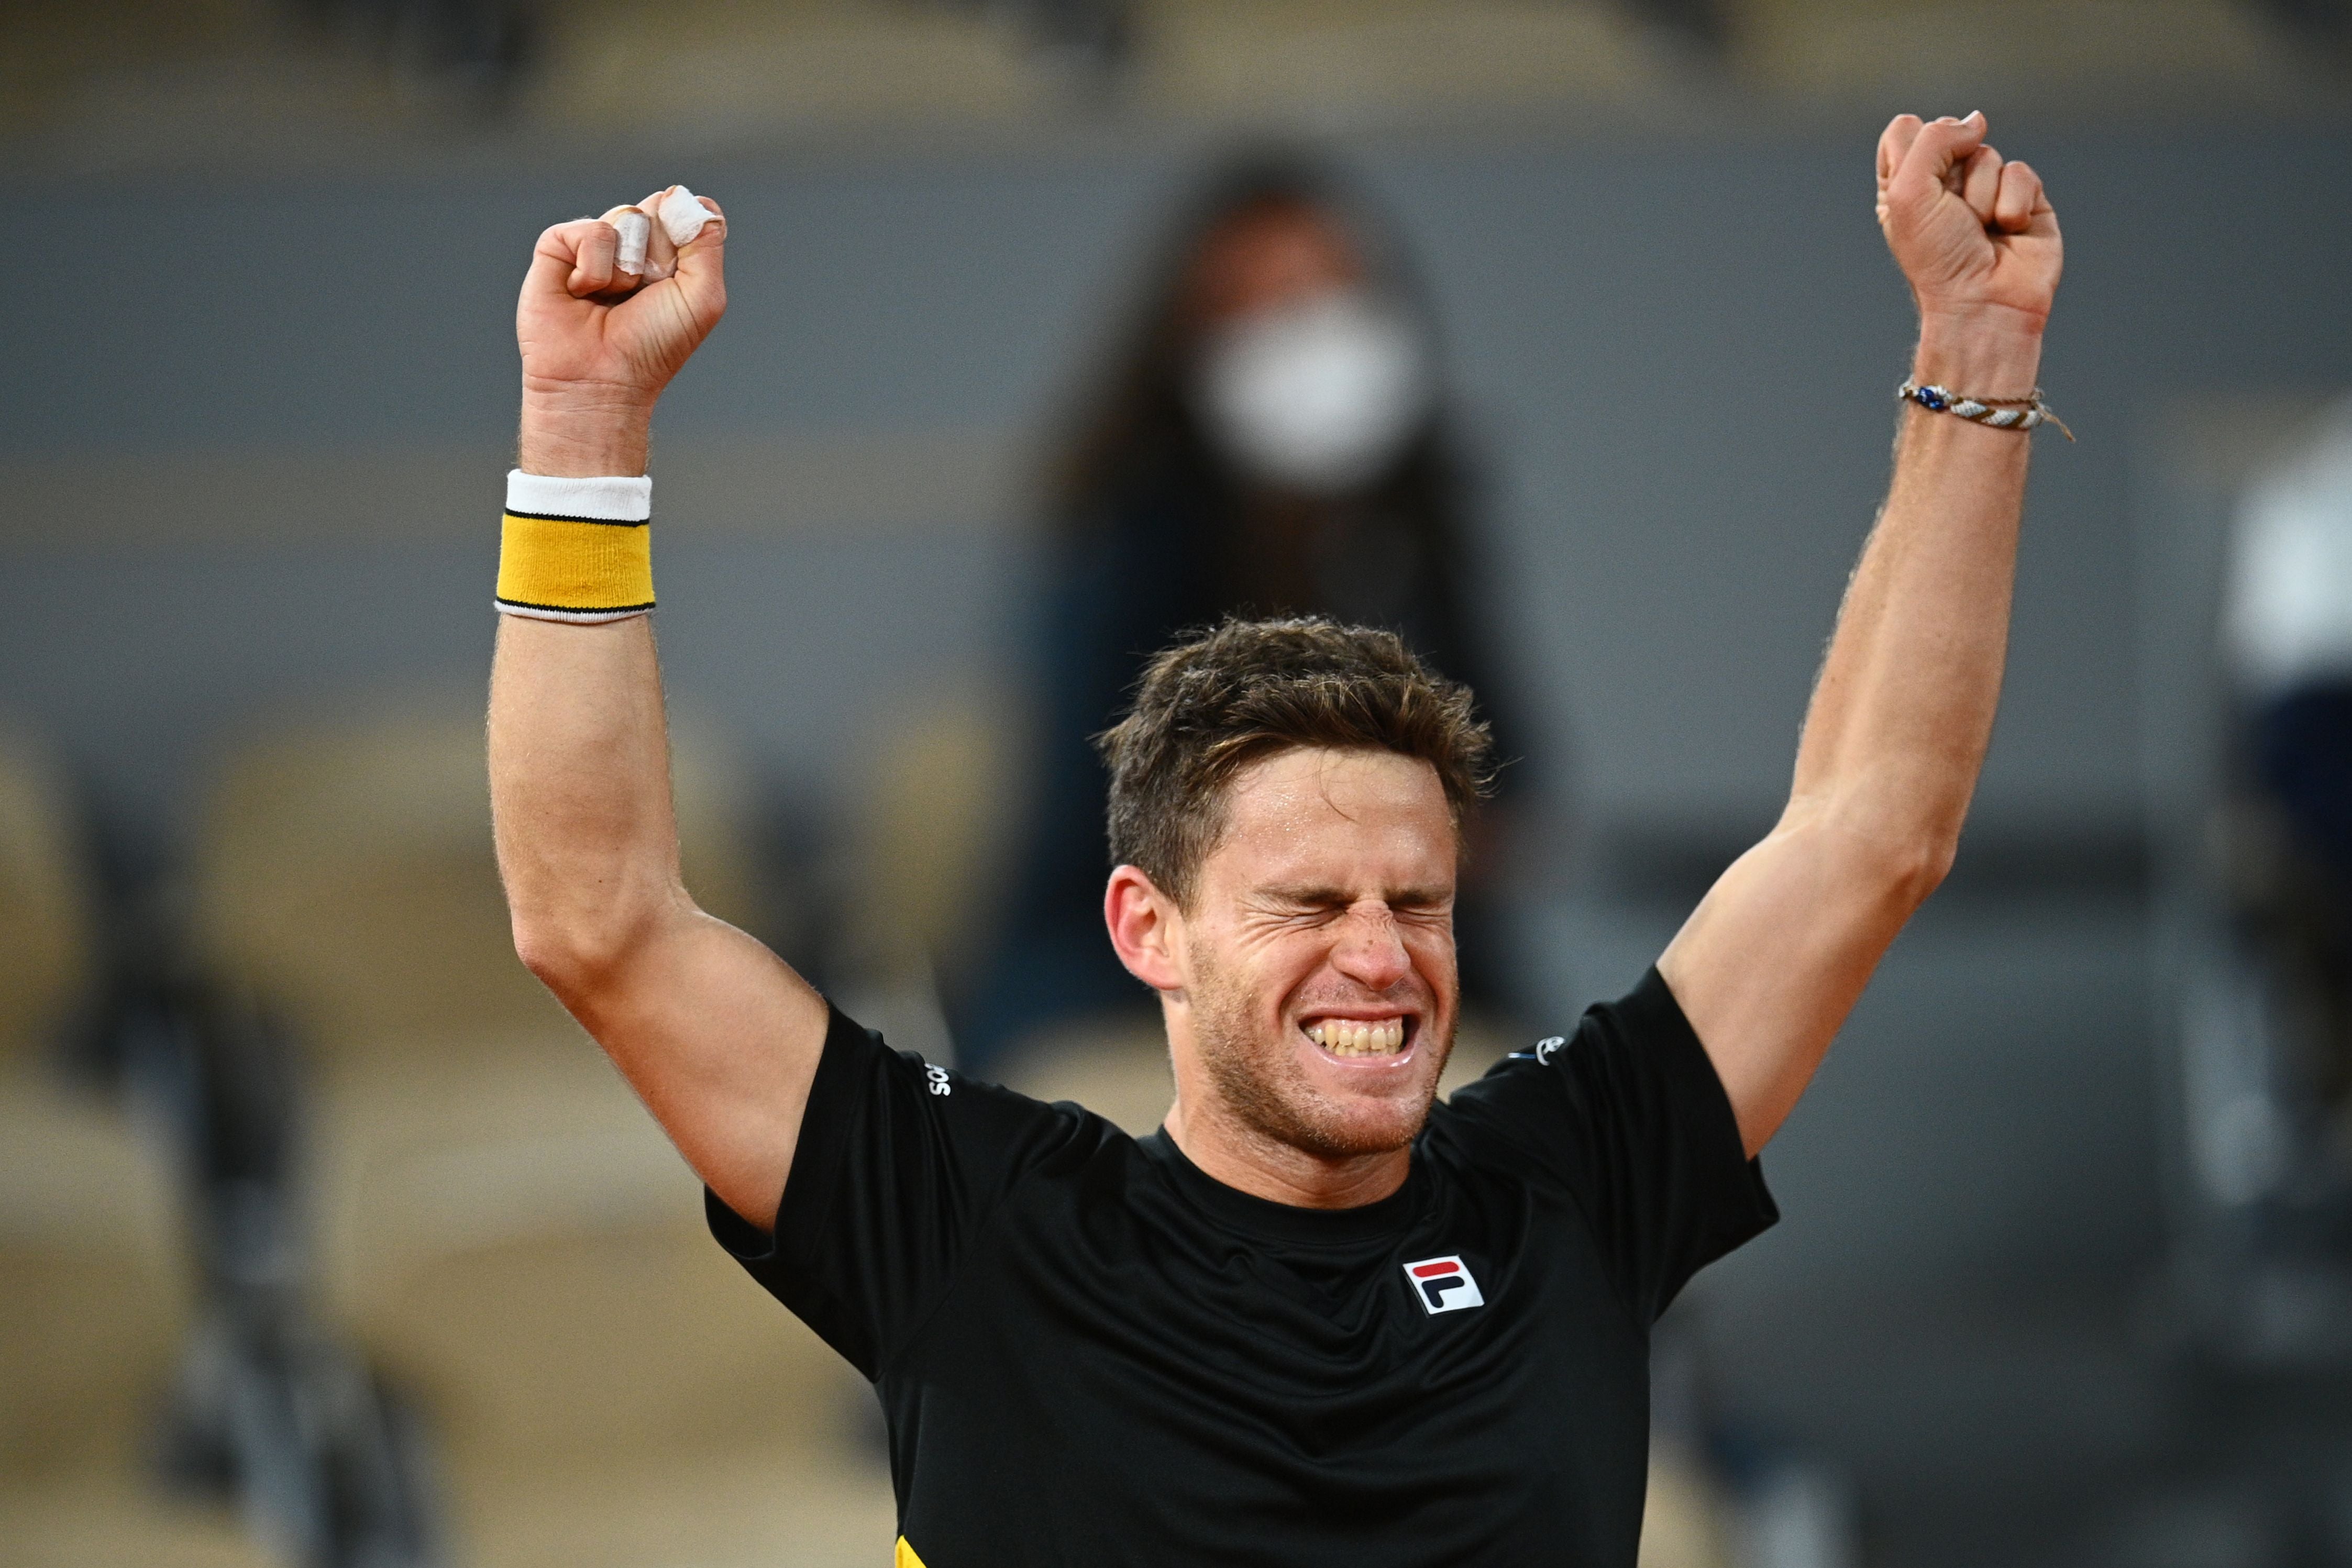 Diego Schwartzman celebrates his epic victory over Dominic Thiem at the French Open